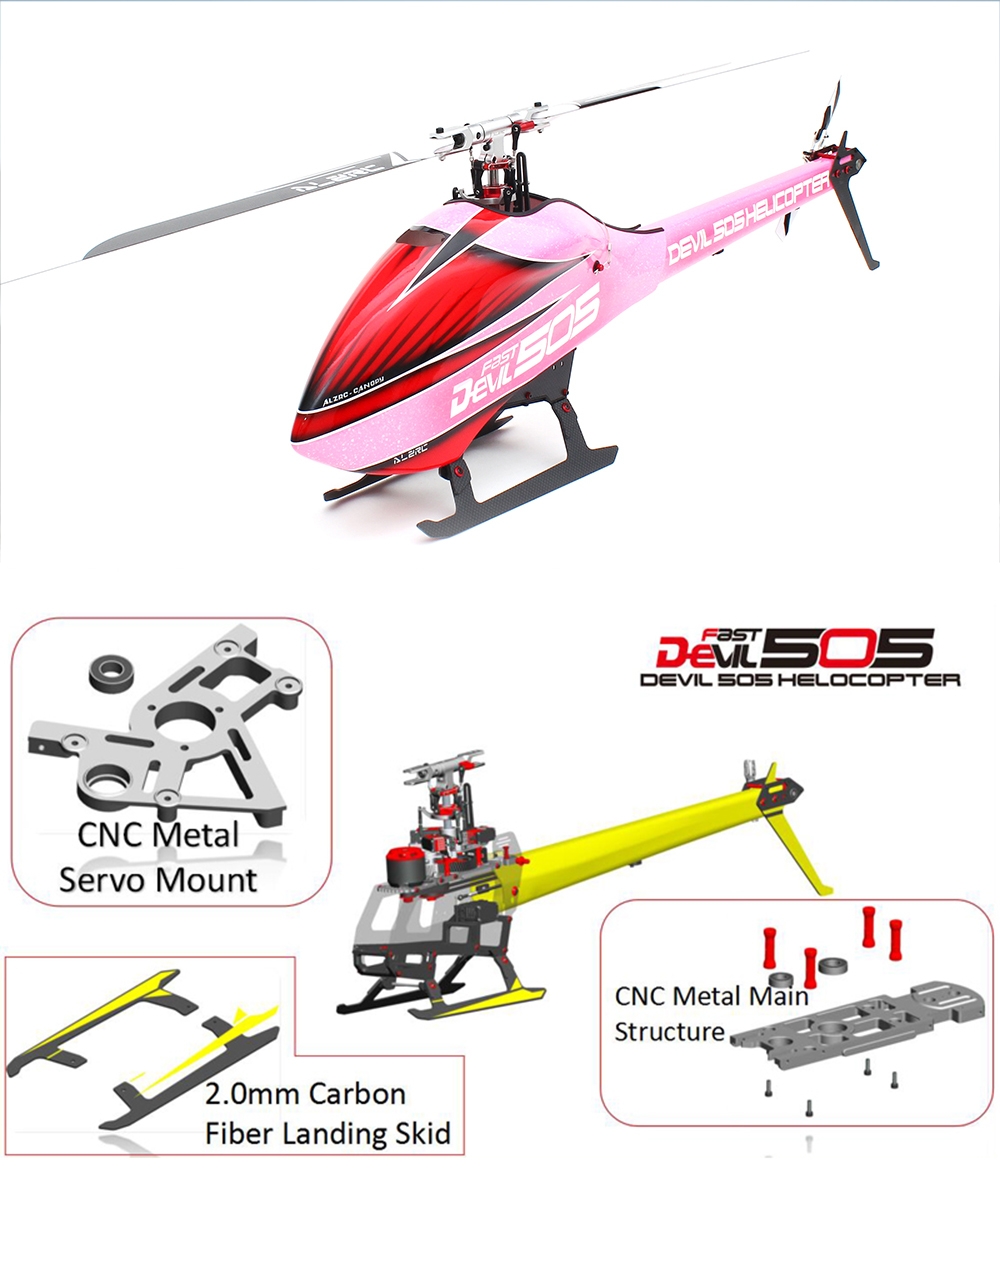 ALZRC Devil 505 Fast Kit RC Helicopter Super Combo With 120A V4 ESC Pink Version